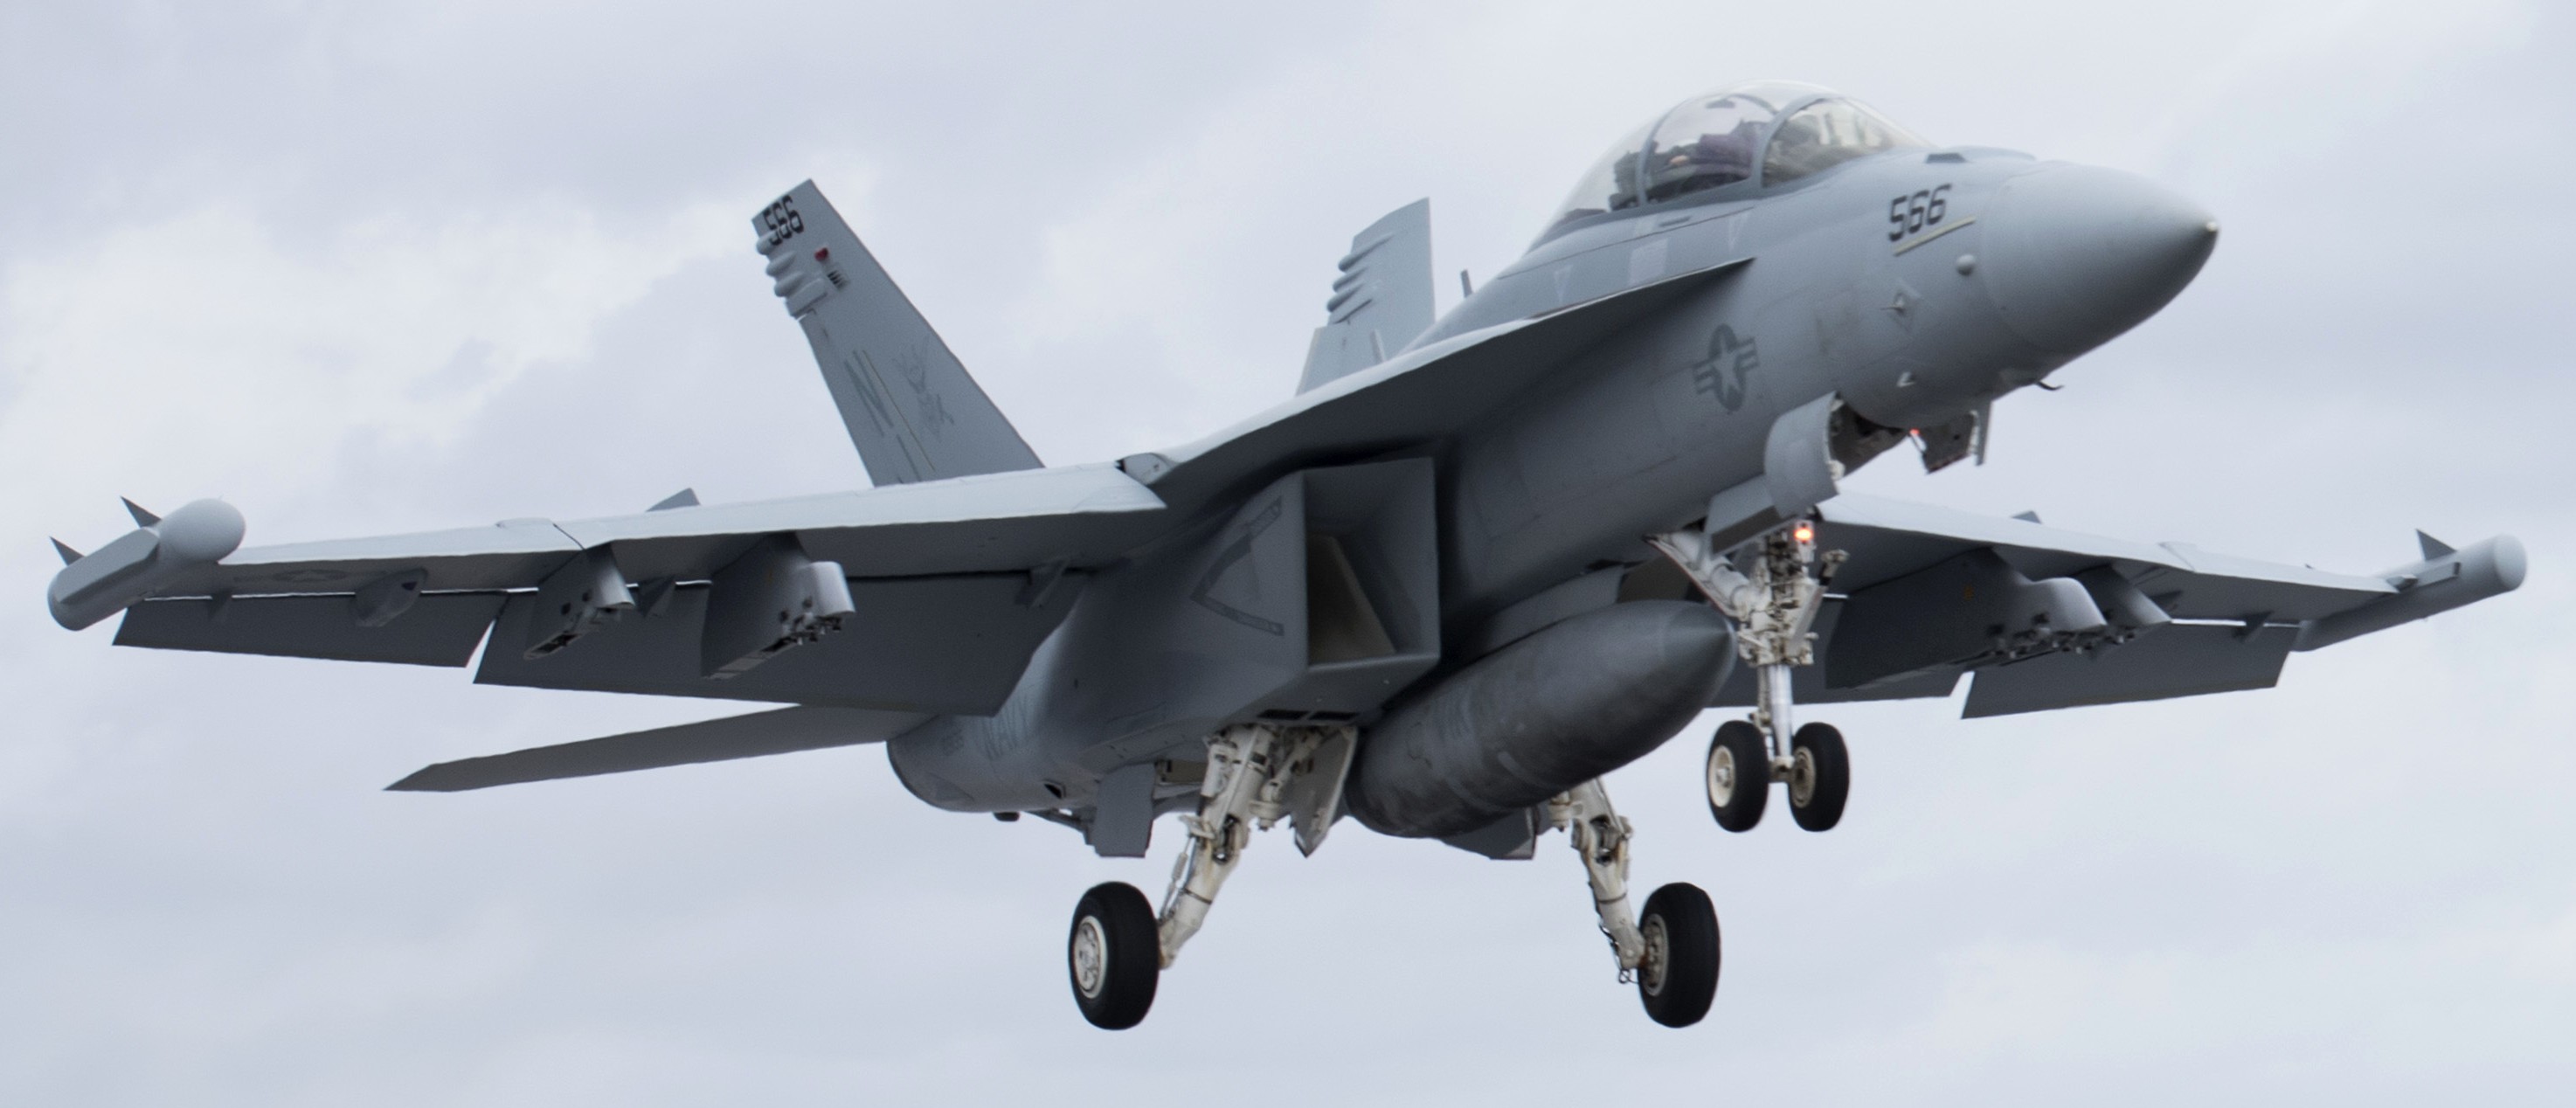 vaq-129 vikings electronic attack squadron fleet replacement frs us navy ea-18g growler 62